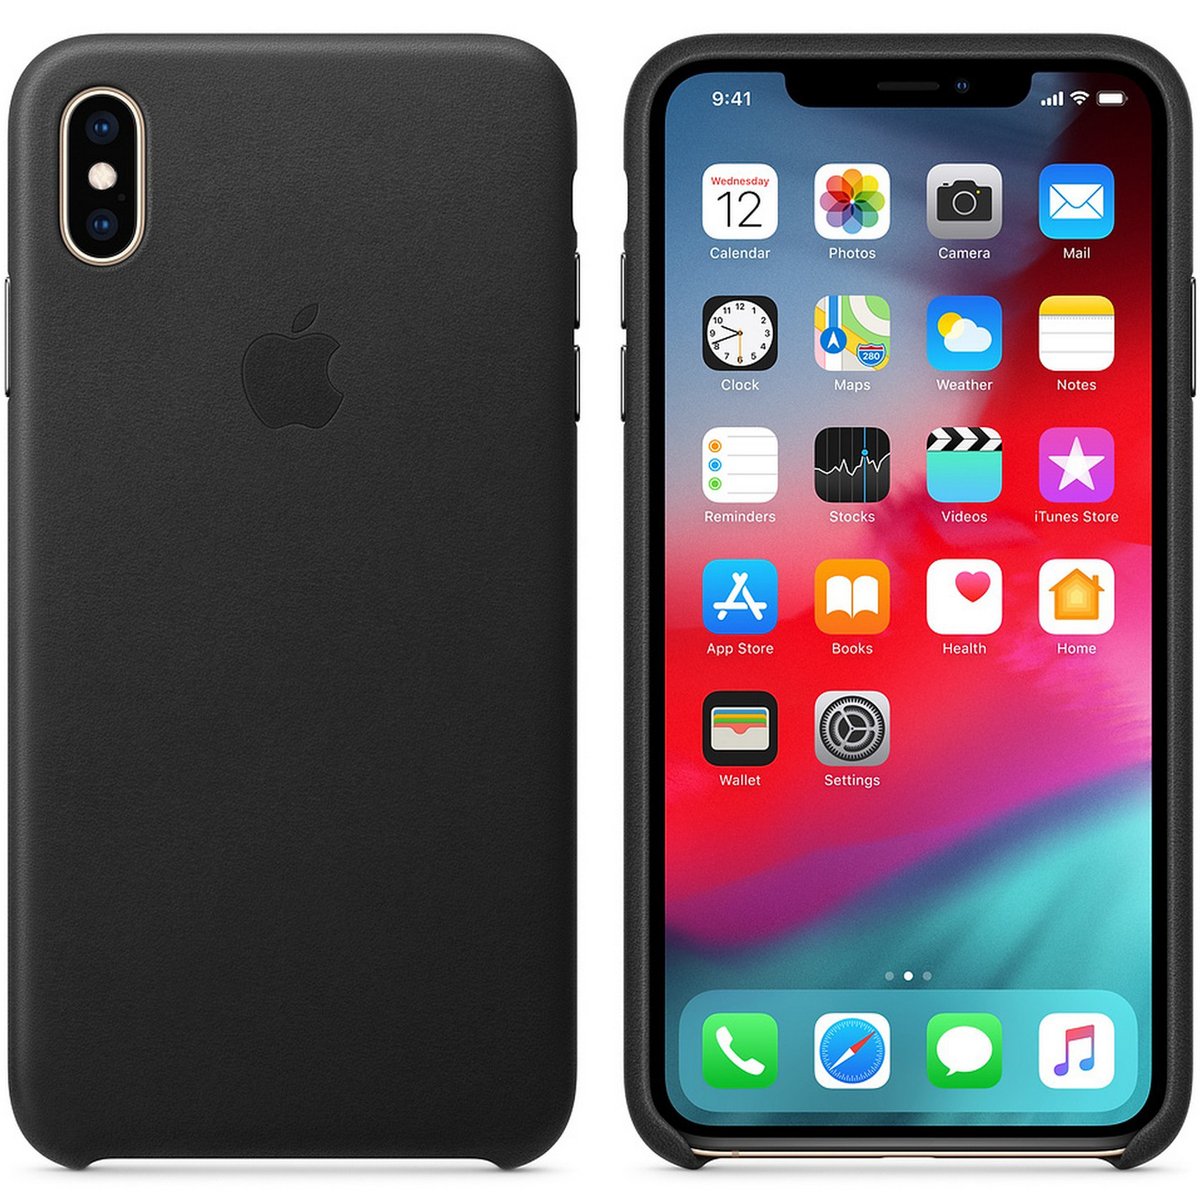 Apple iPhone XS Max Leather Case Black